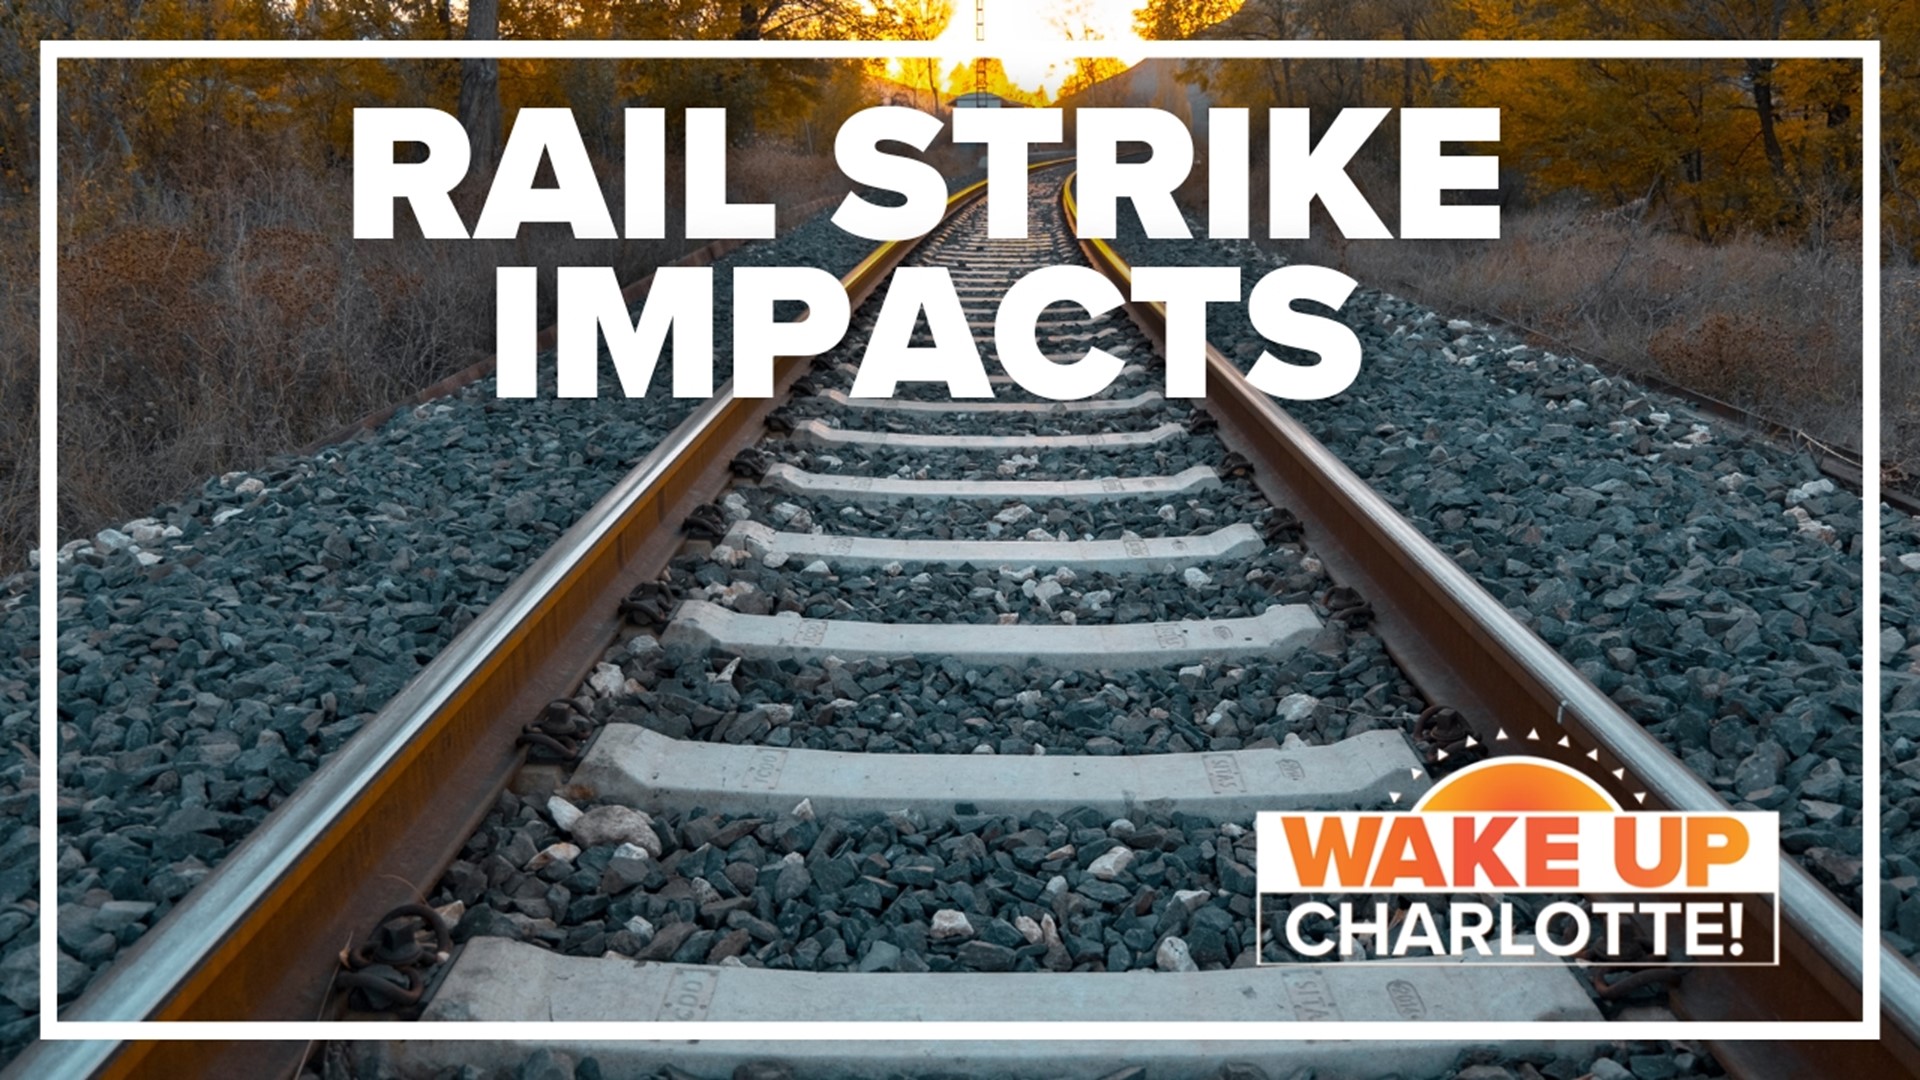 Railroads haul about 40% of the nations good each year, meaning for every day workers strike the country would lose $2 billion a day.